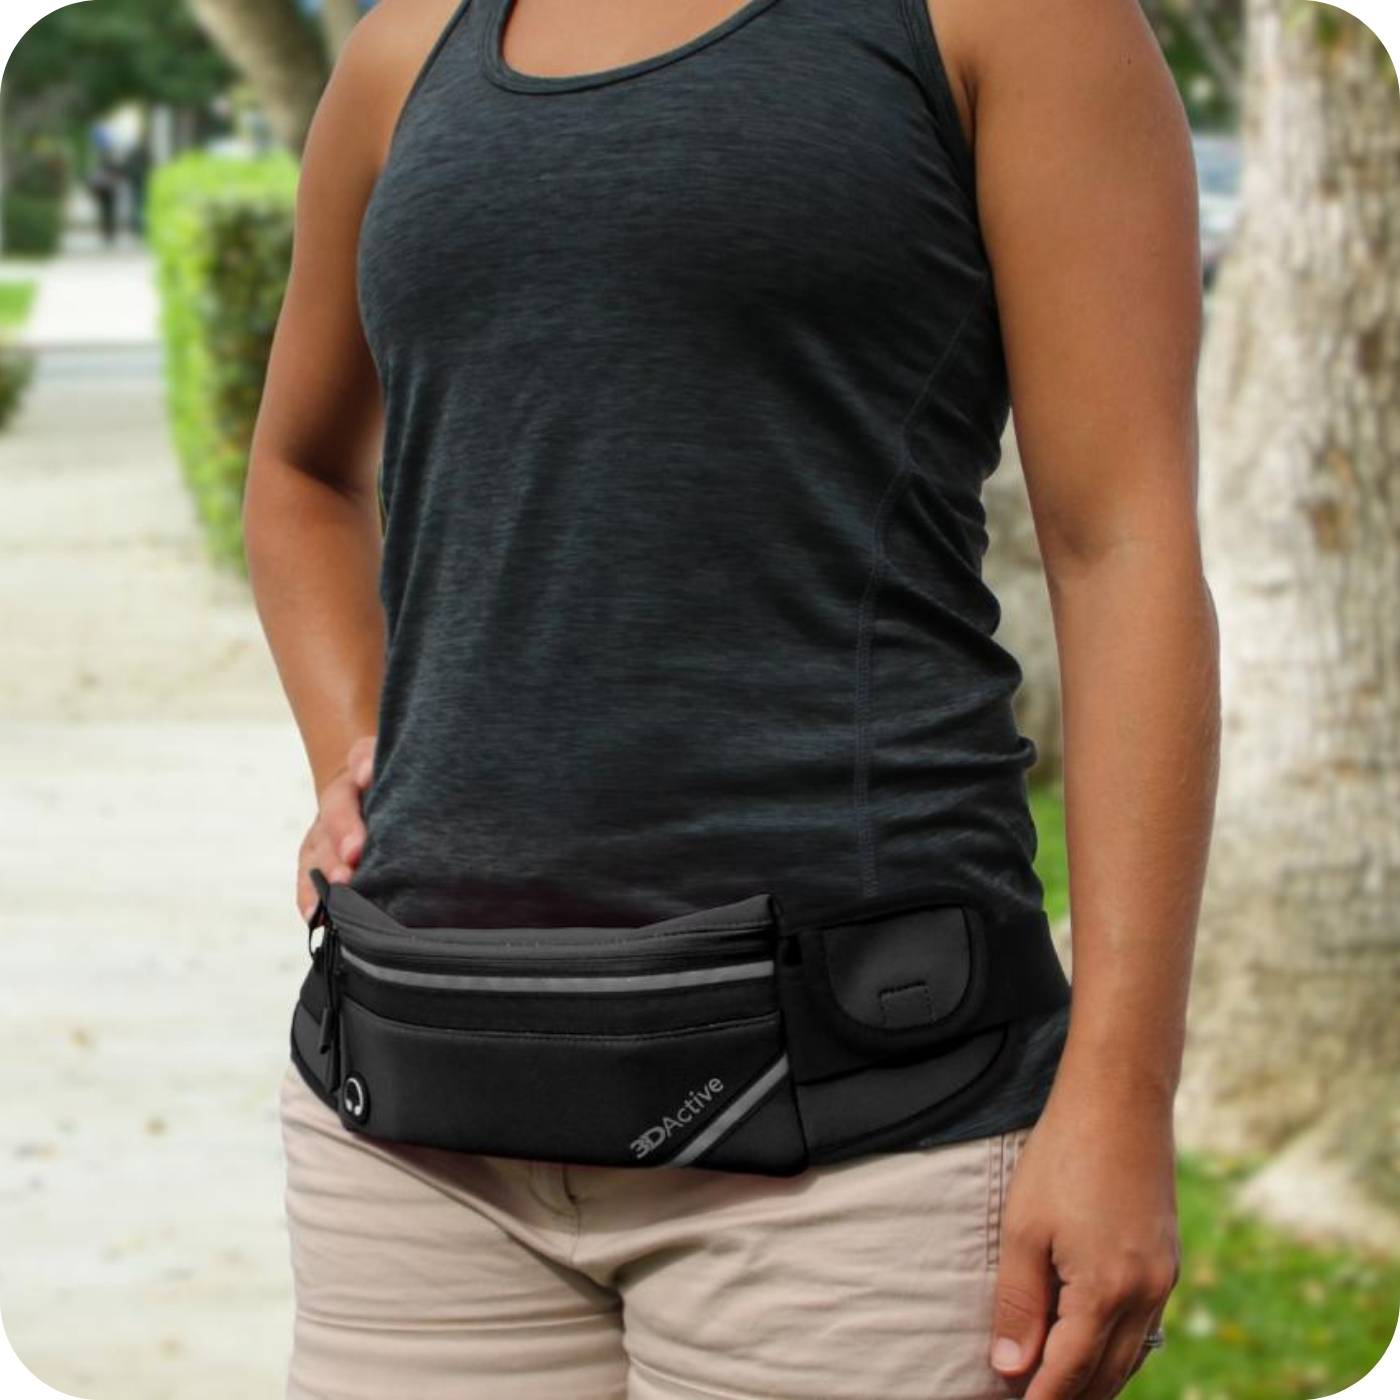 woman walking in the park with her 3dactive running bag